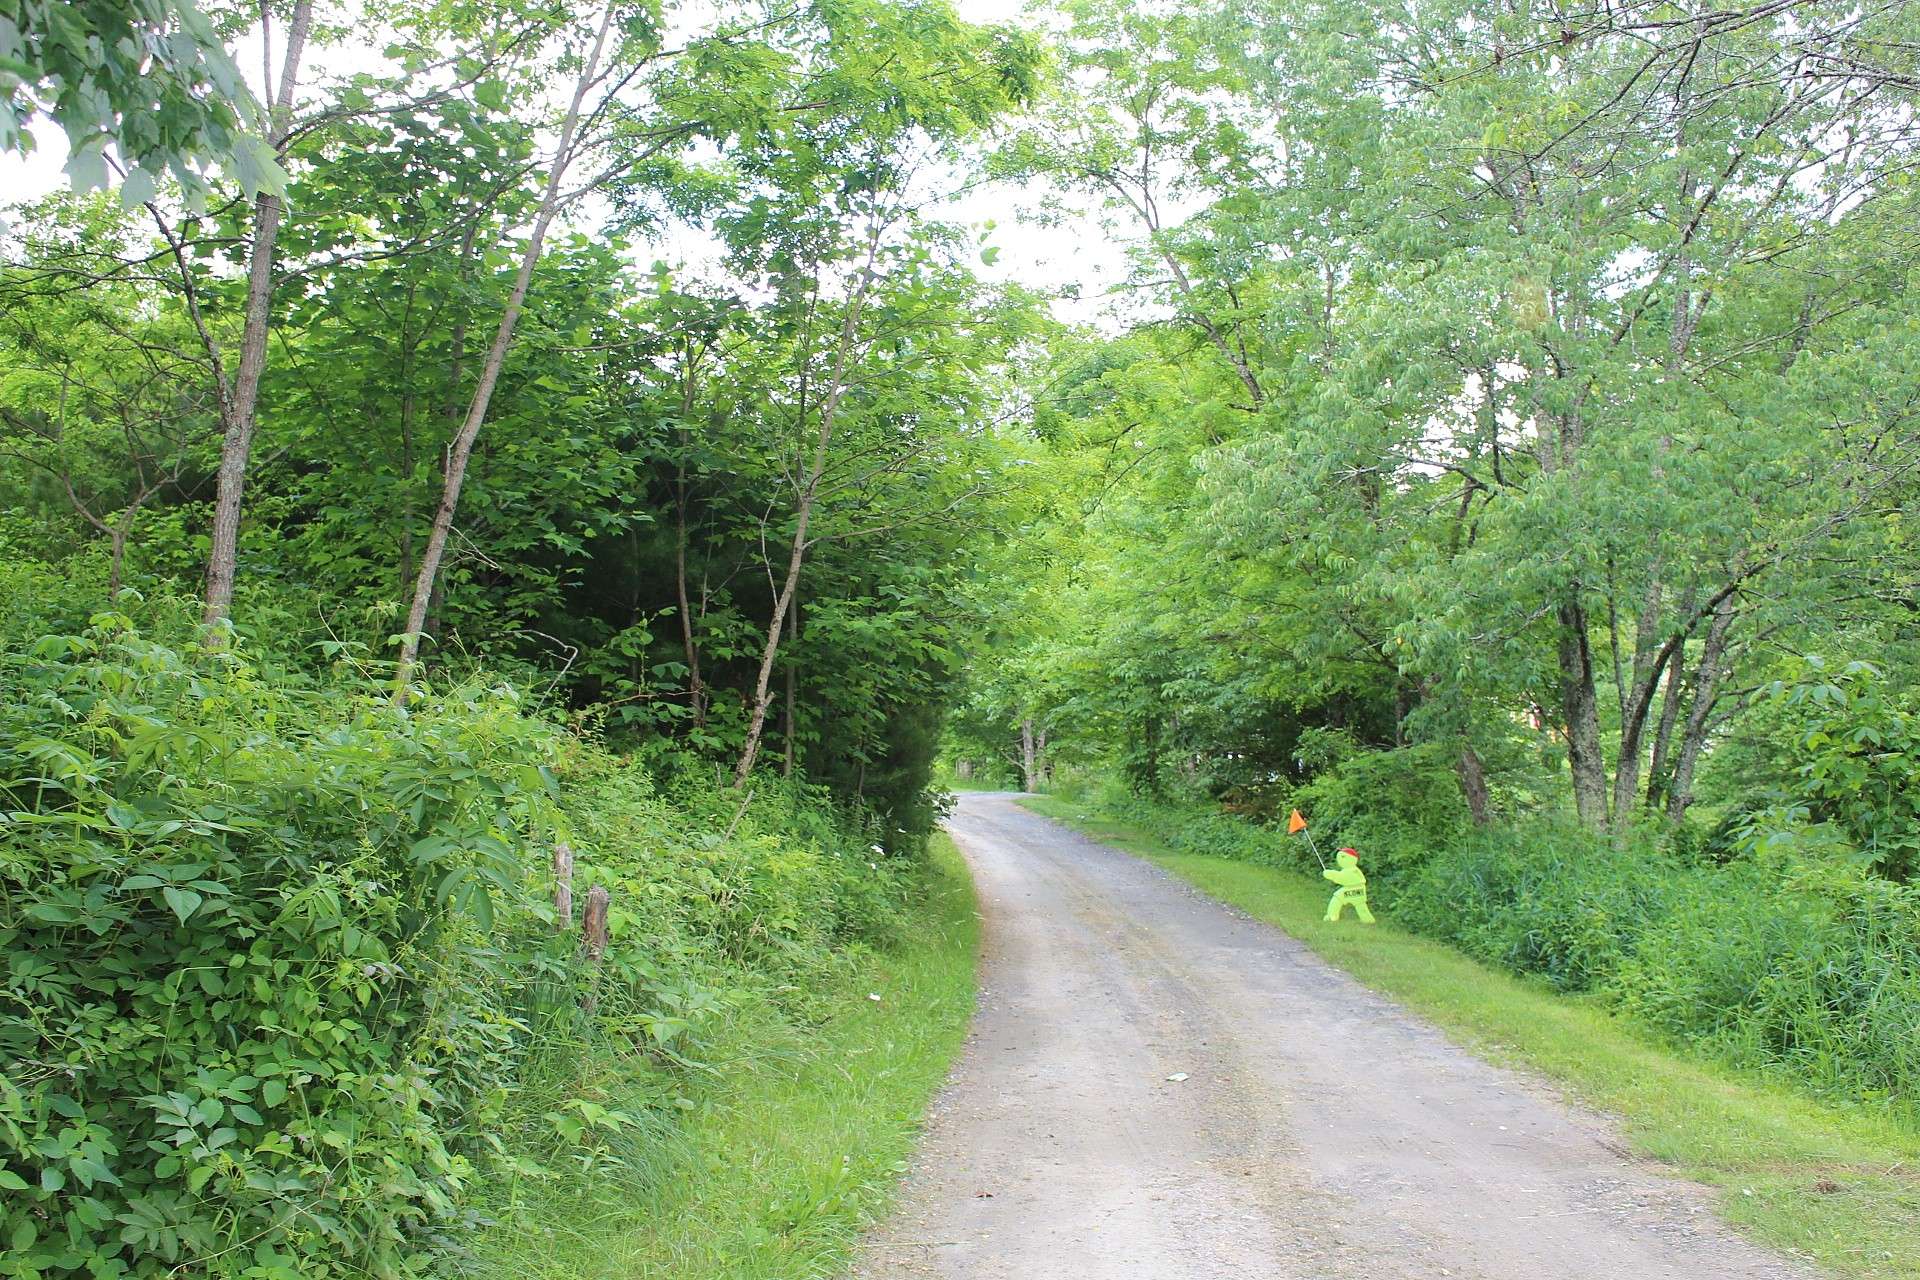 This land tract offers road frontage on two state maintained roads, Willie Walker Road and Roaring Fork Road.